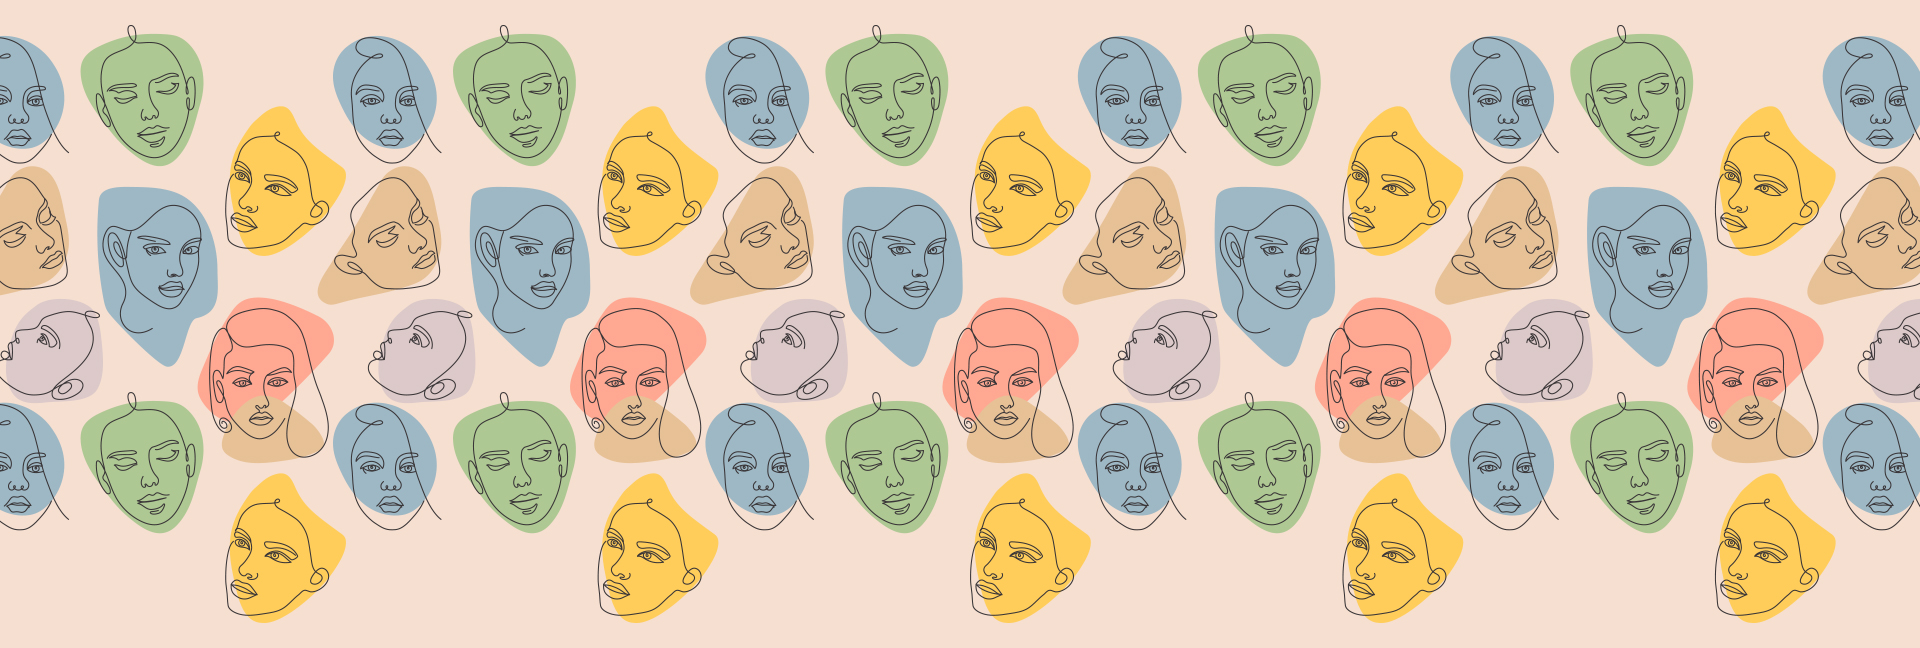 Various pencil sketches of women's faces colored in blue, green or red on a tan background.